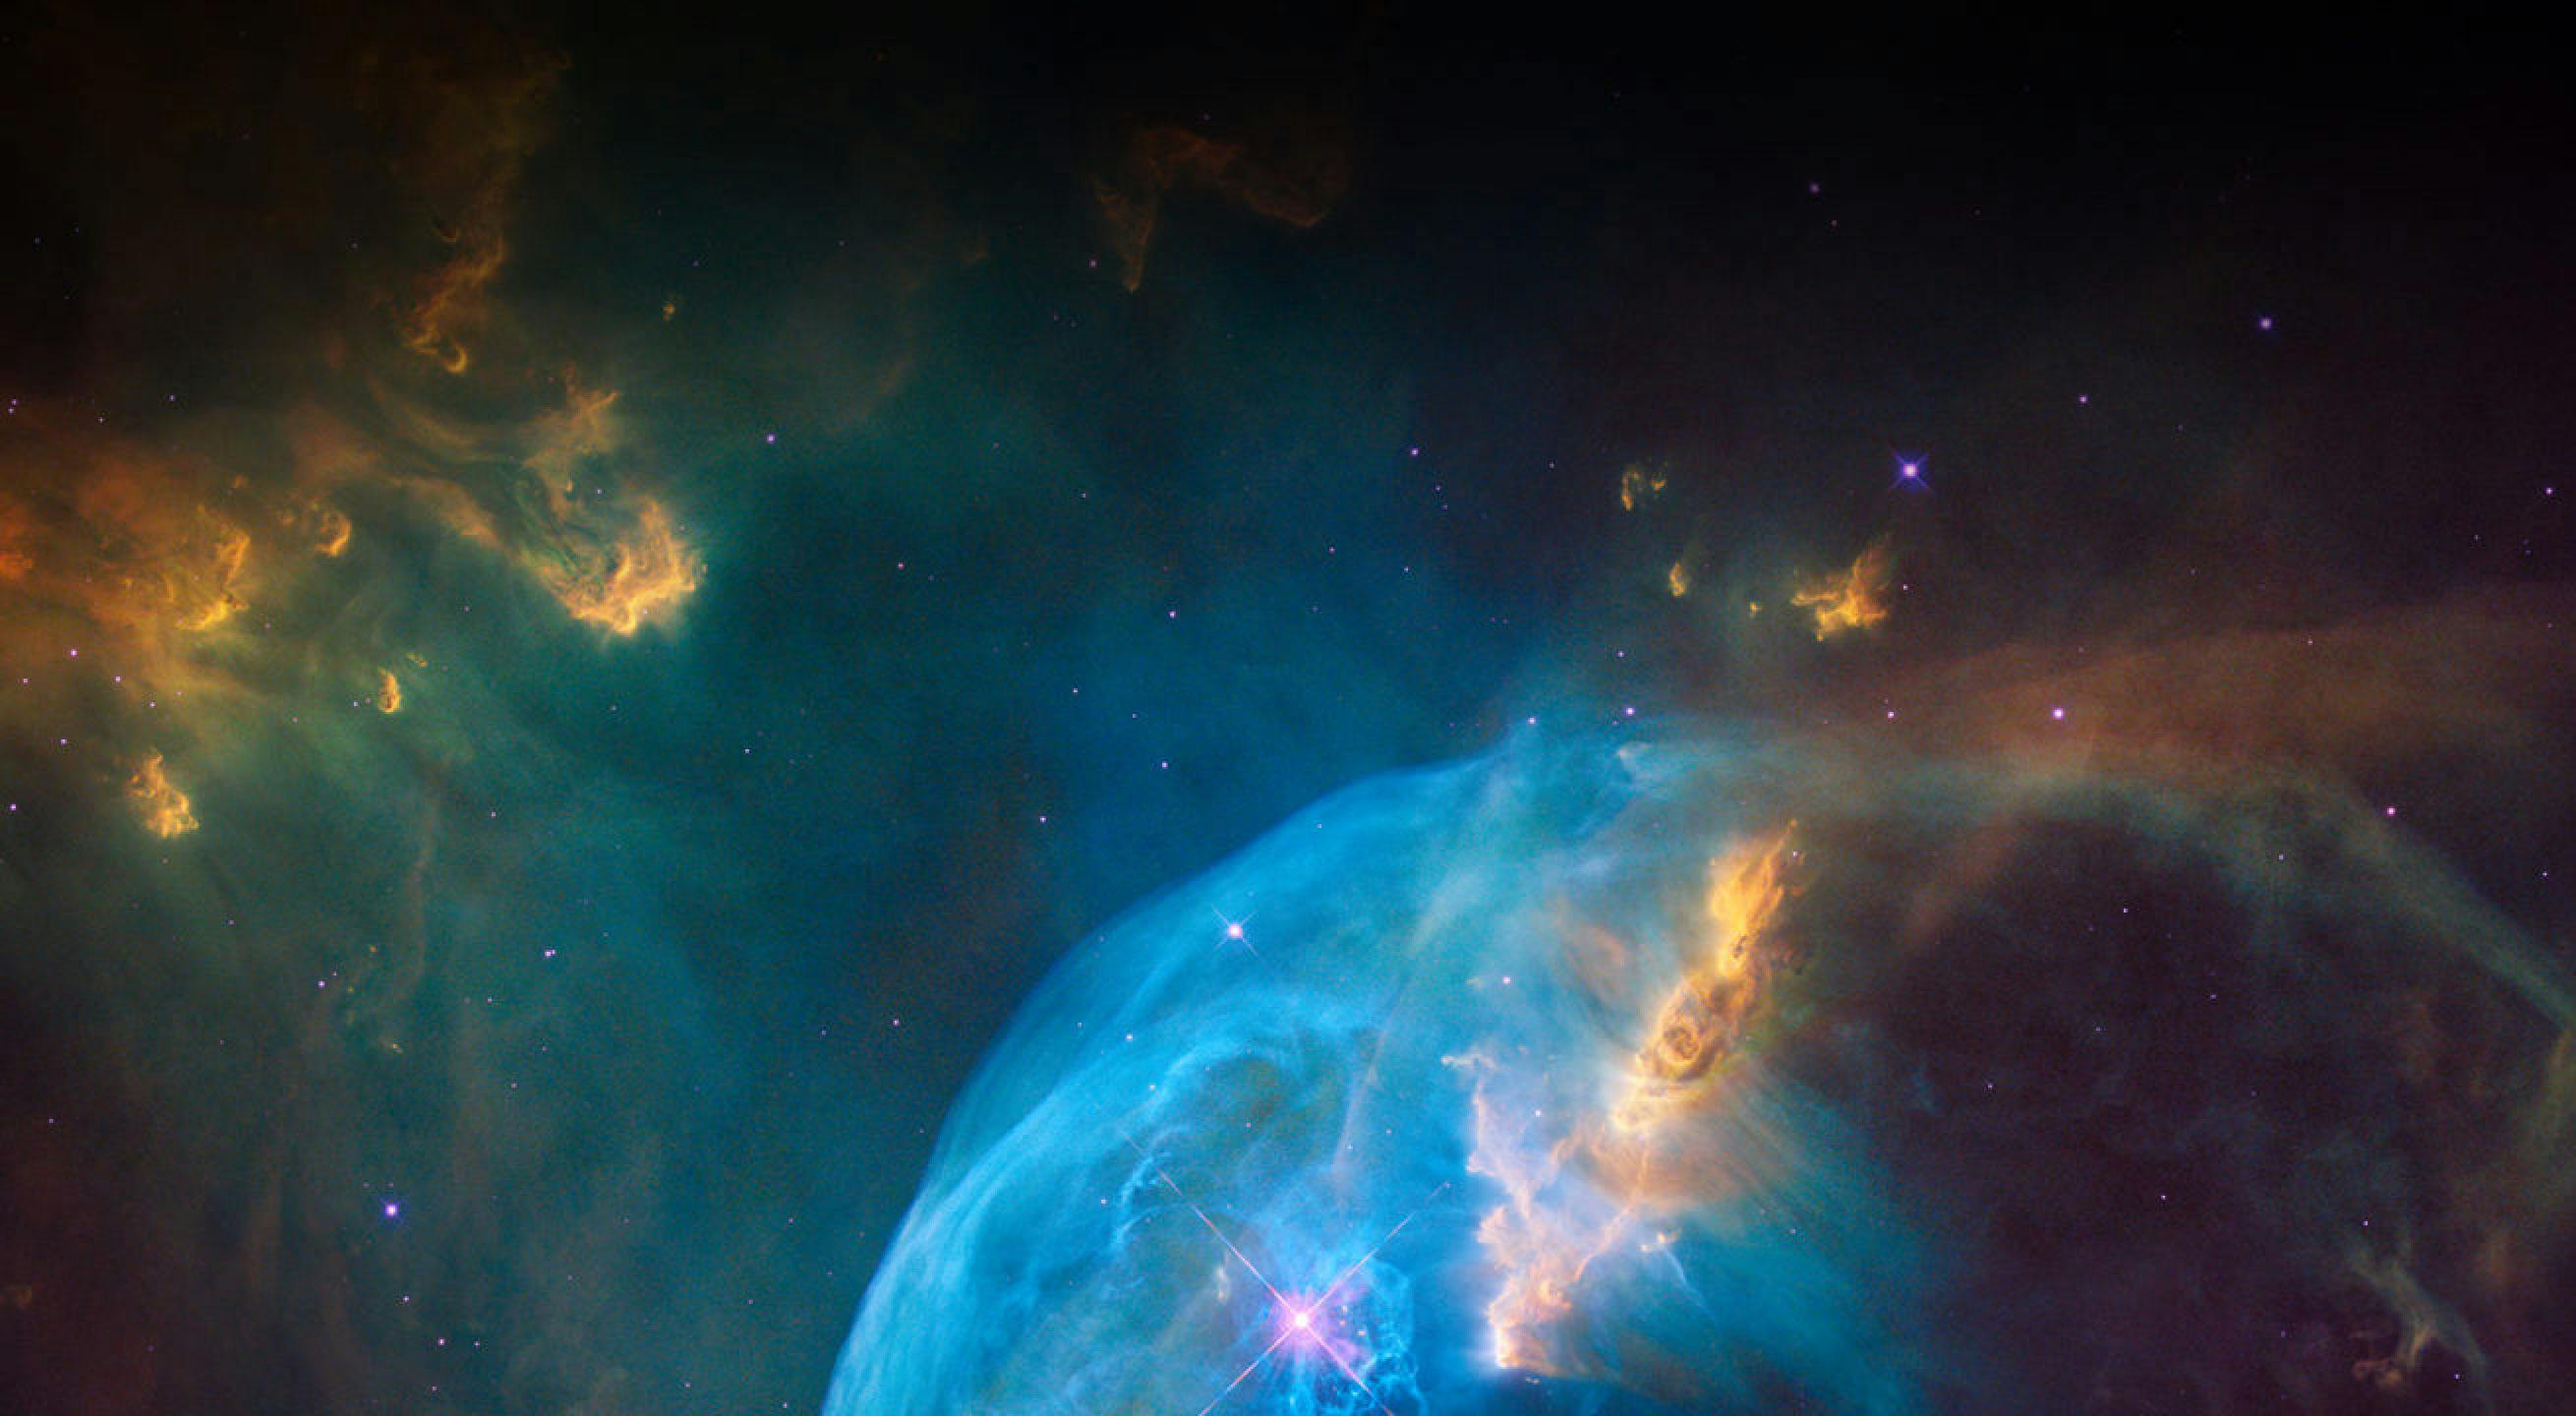 The Bubble Nebula, also known as NGC 7635, as observed by the NASA/ESA Hubble Space Telescope